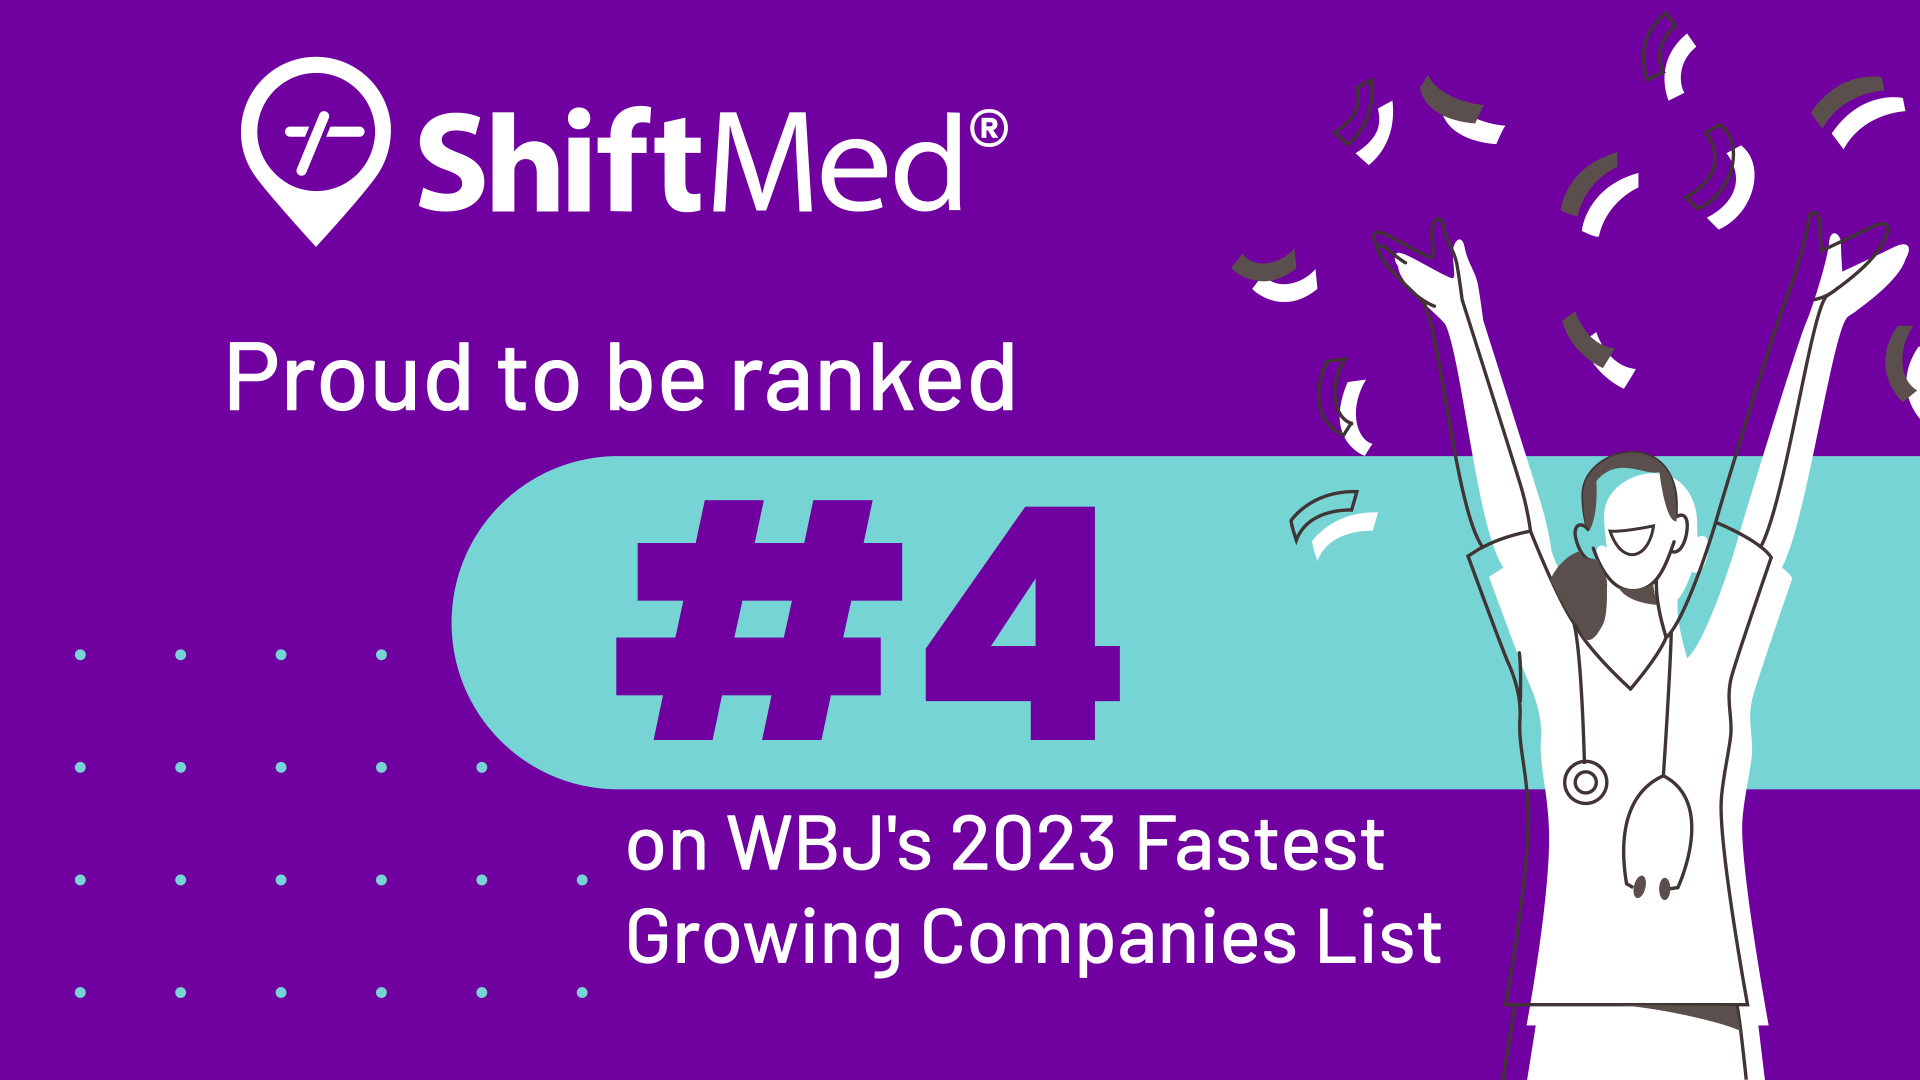 ShiftMed is proud to be ranked #4 on WBJ's 2023 Fasted Growing Companies List